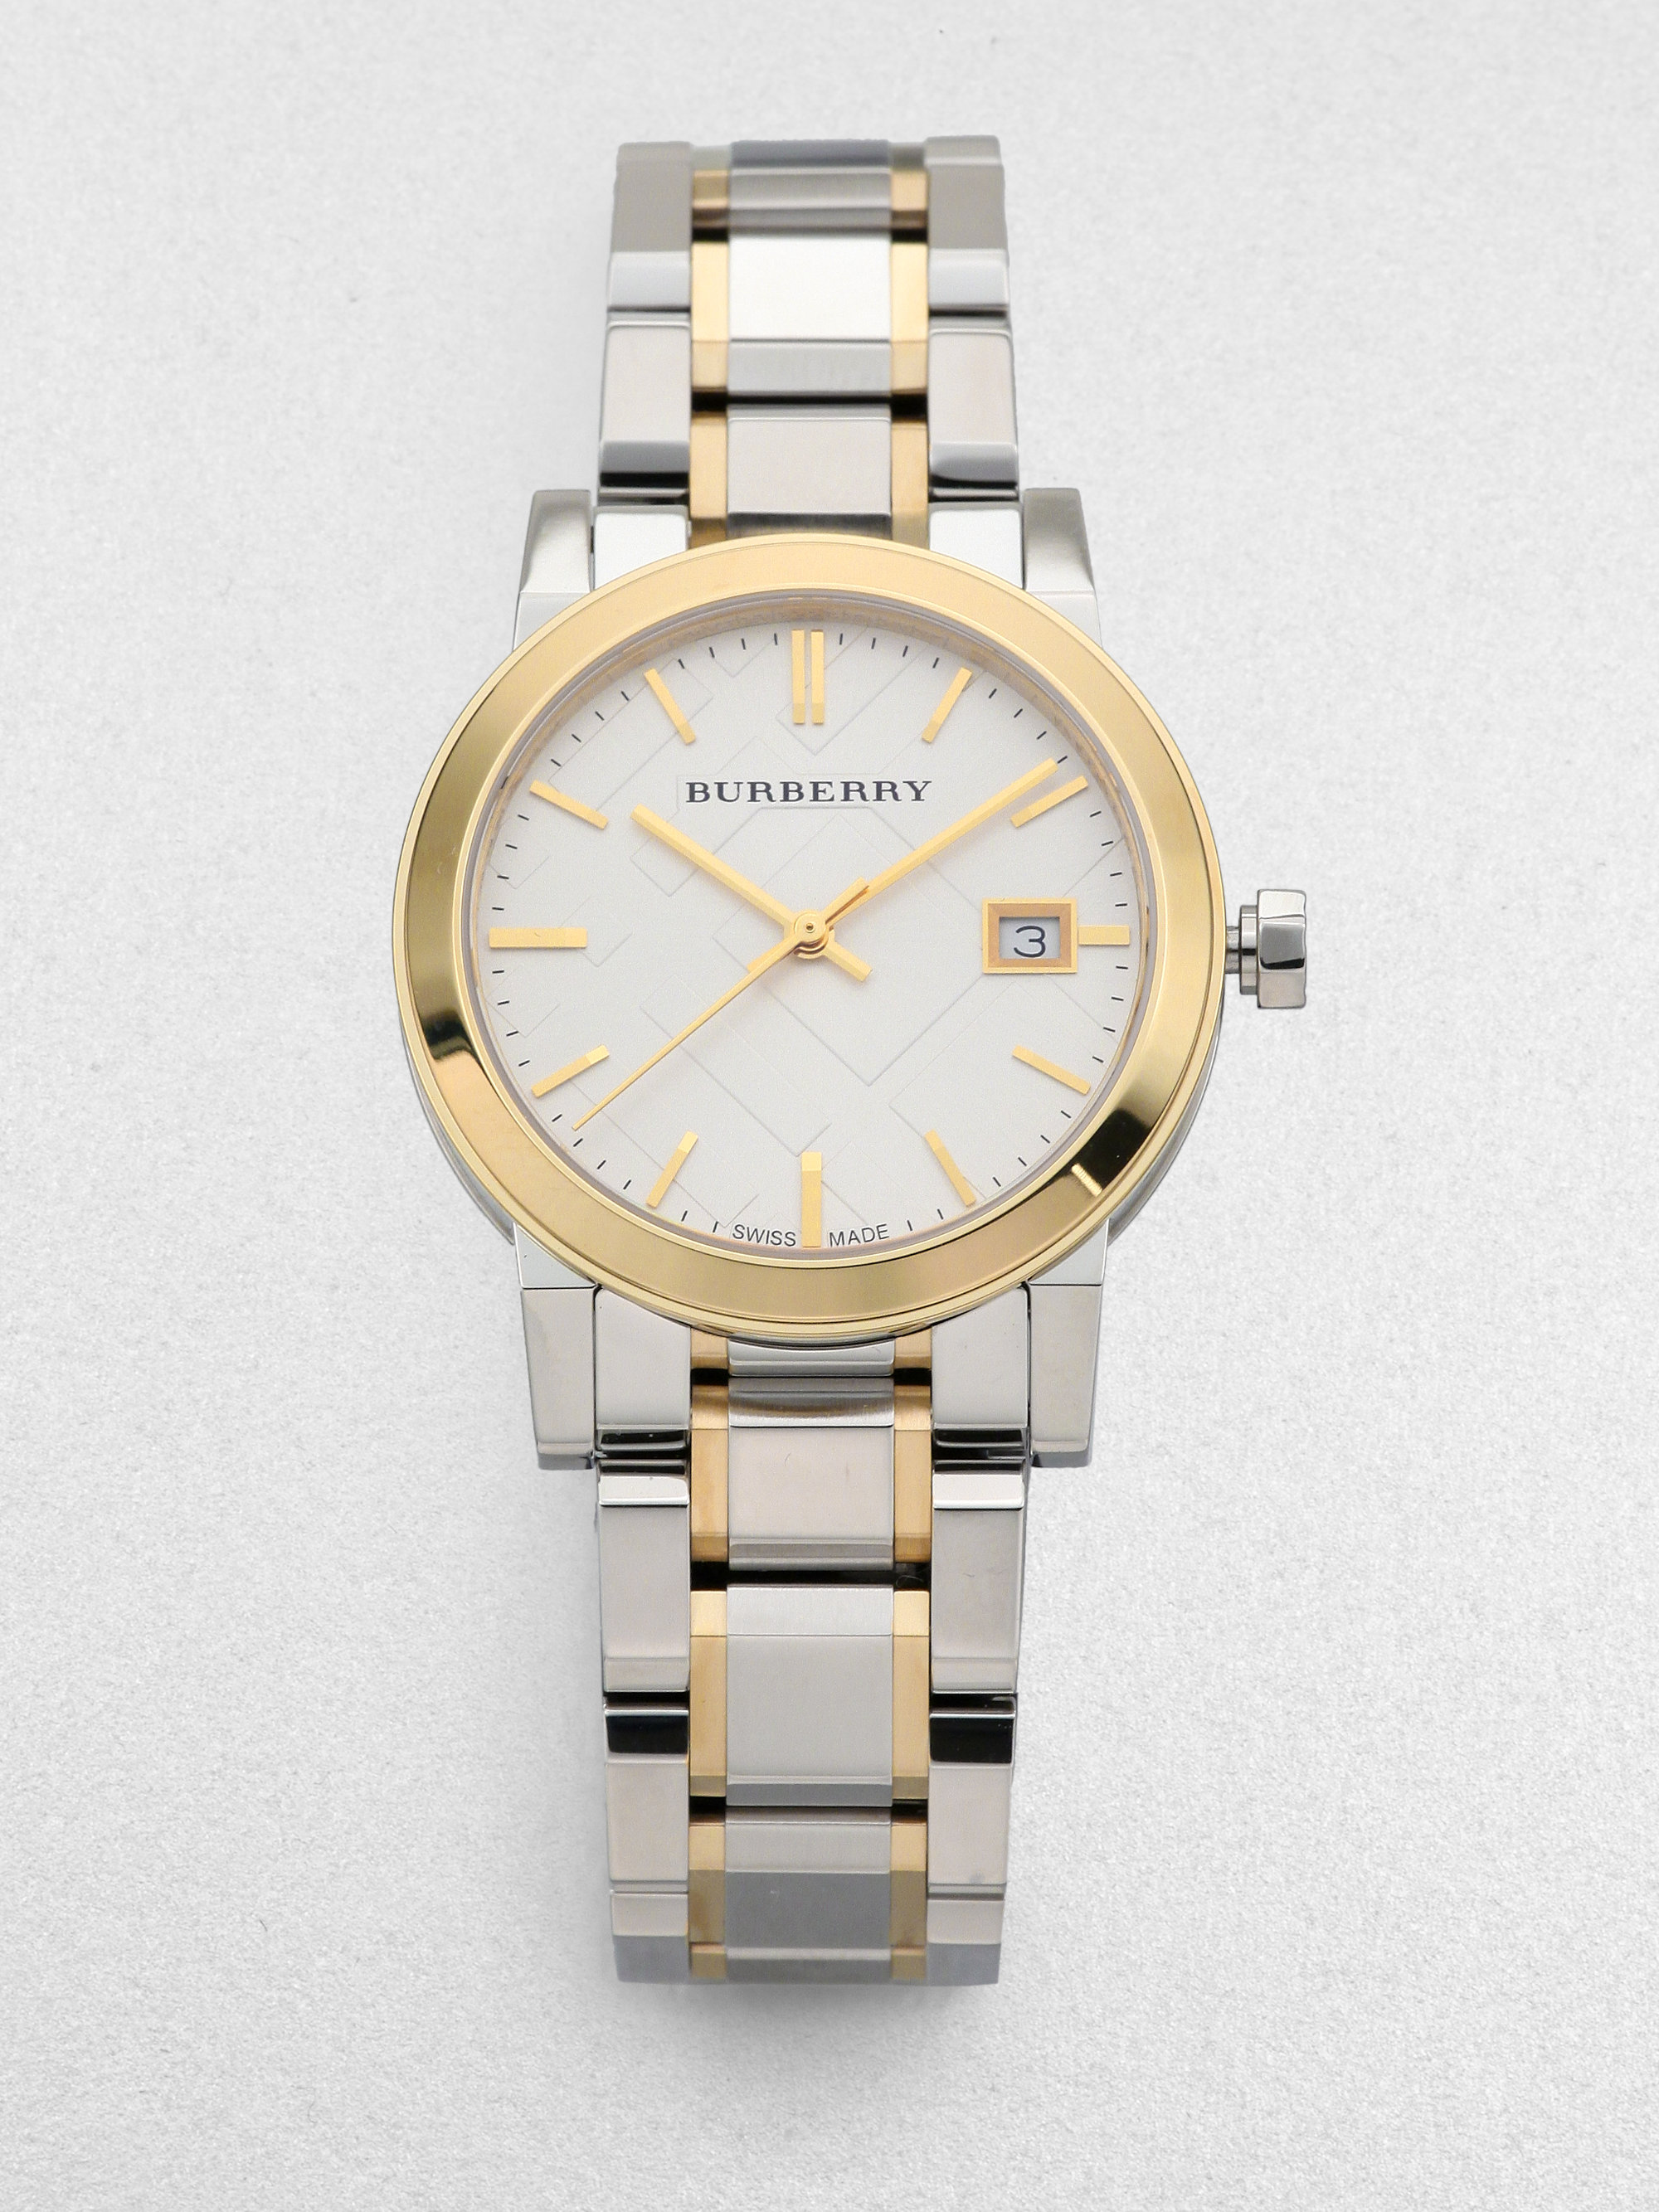 Lyst - Burberry City Two-tone Stainless Steel Bracelet Watch/34mm in ...